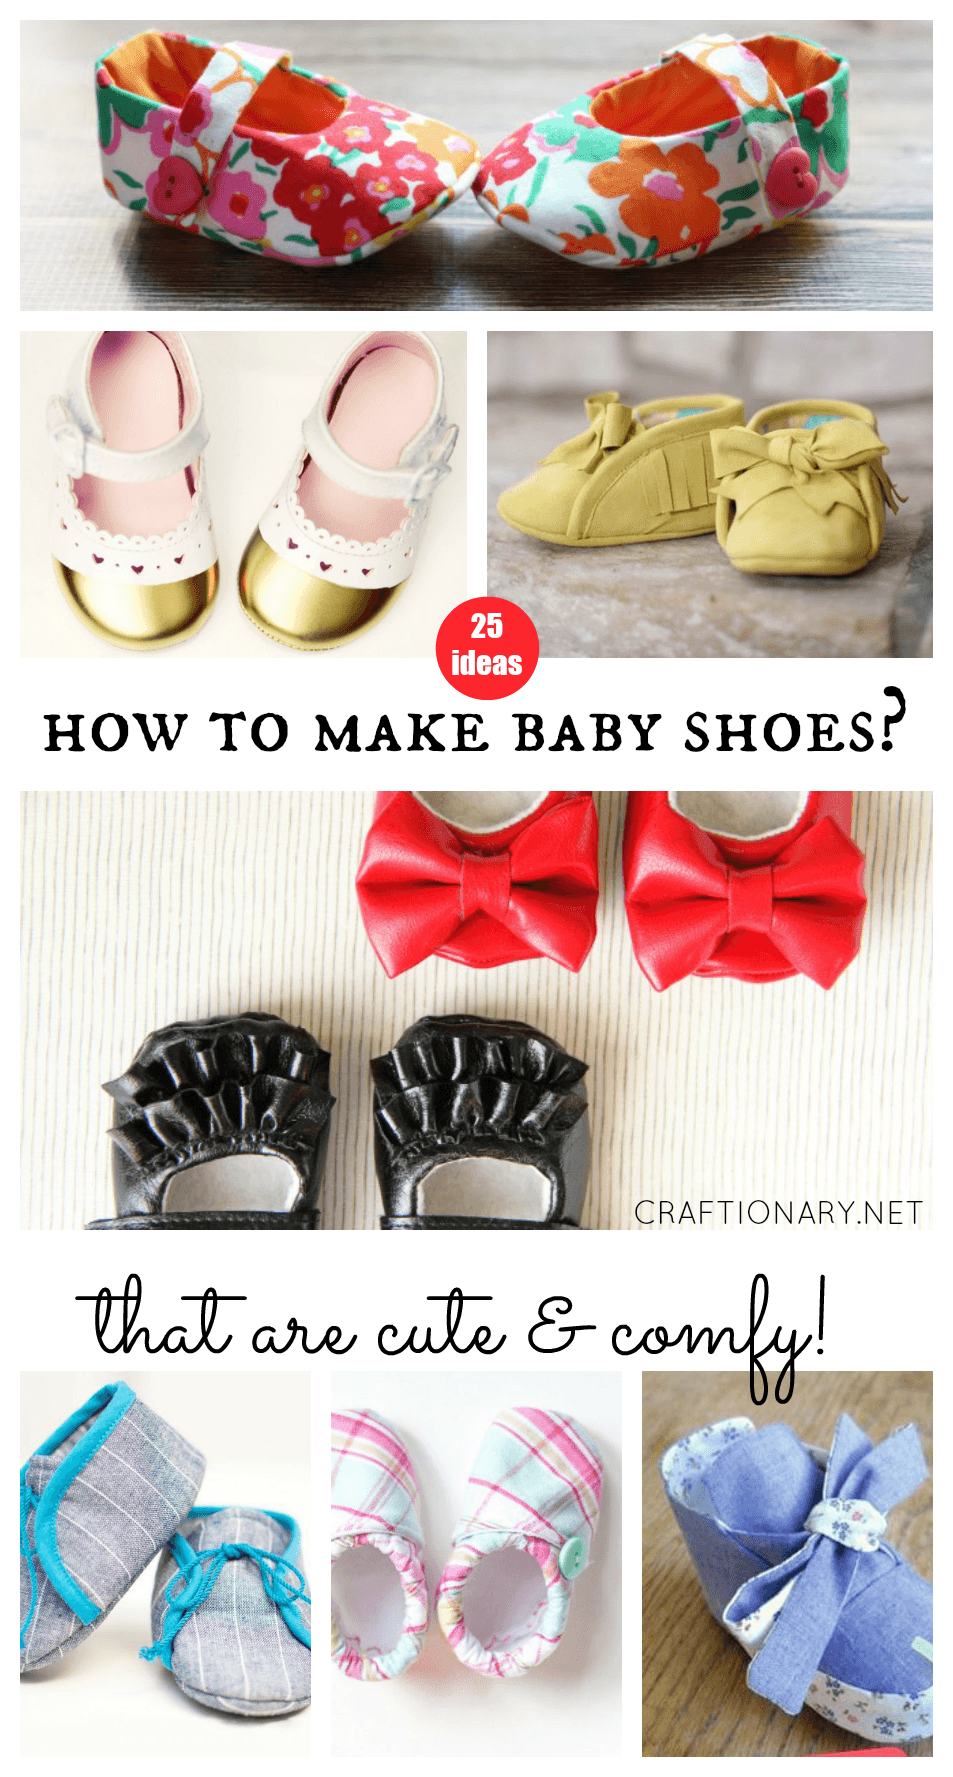 How to make baby shoes with fabric and leather (cute and comfy)